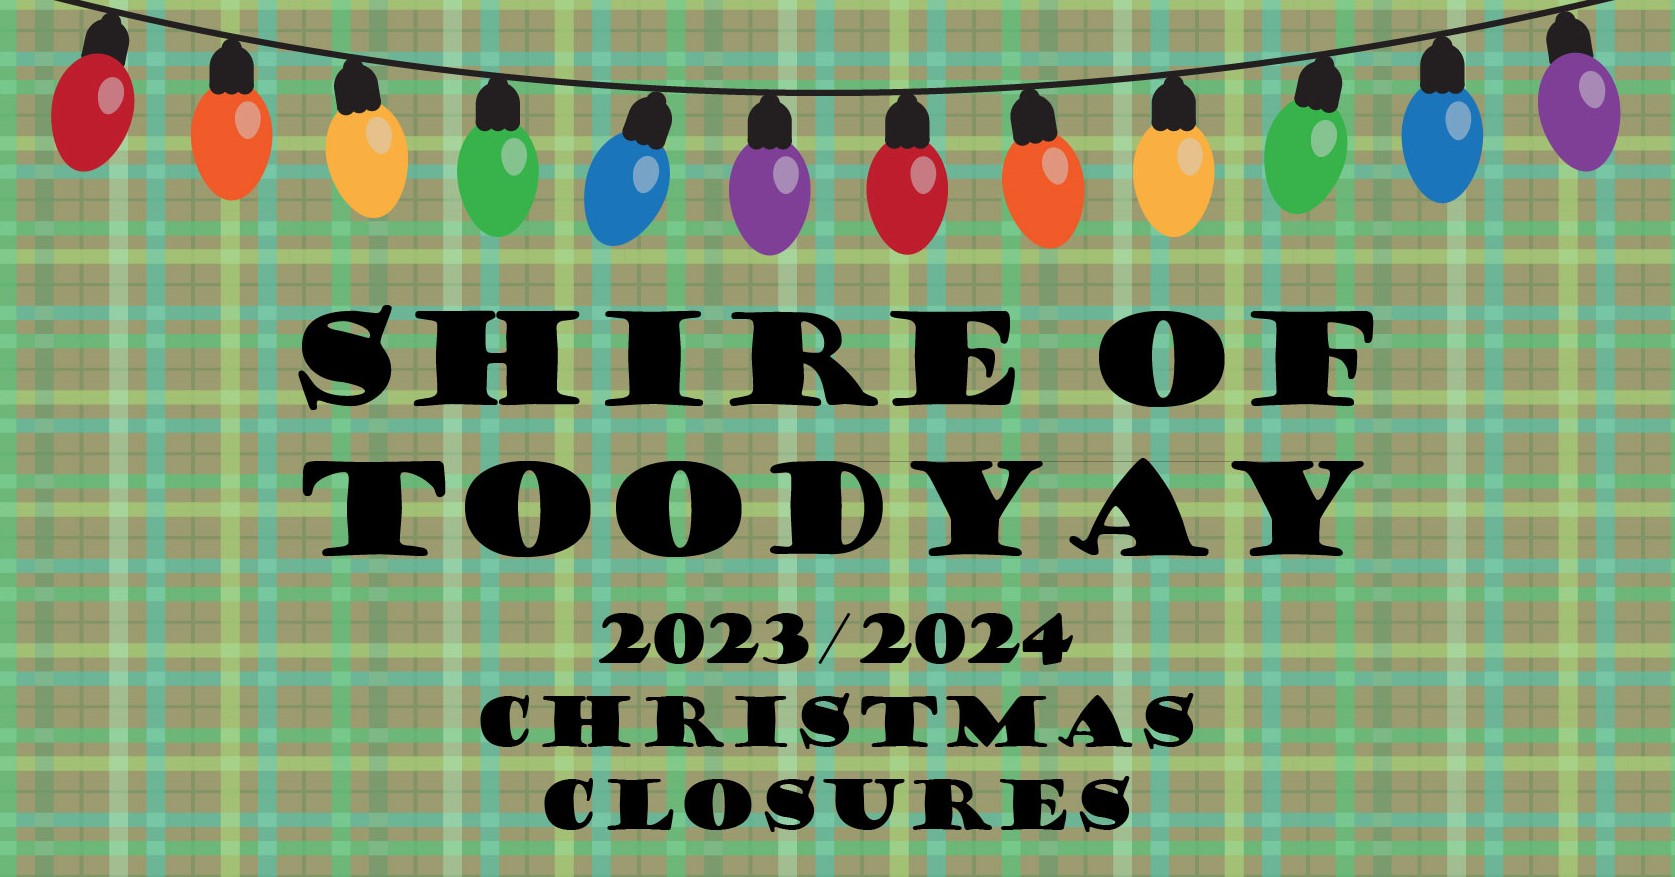 2023/2024 Christmas Closure of Shire Offices